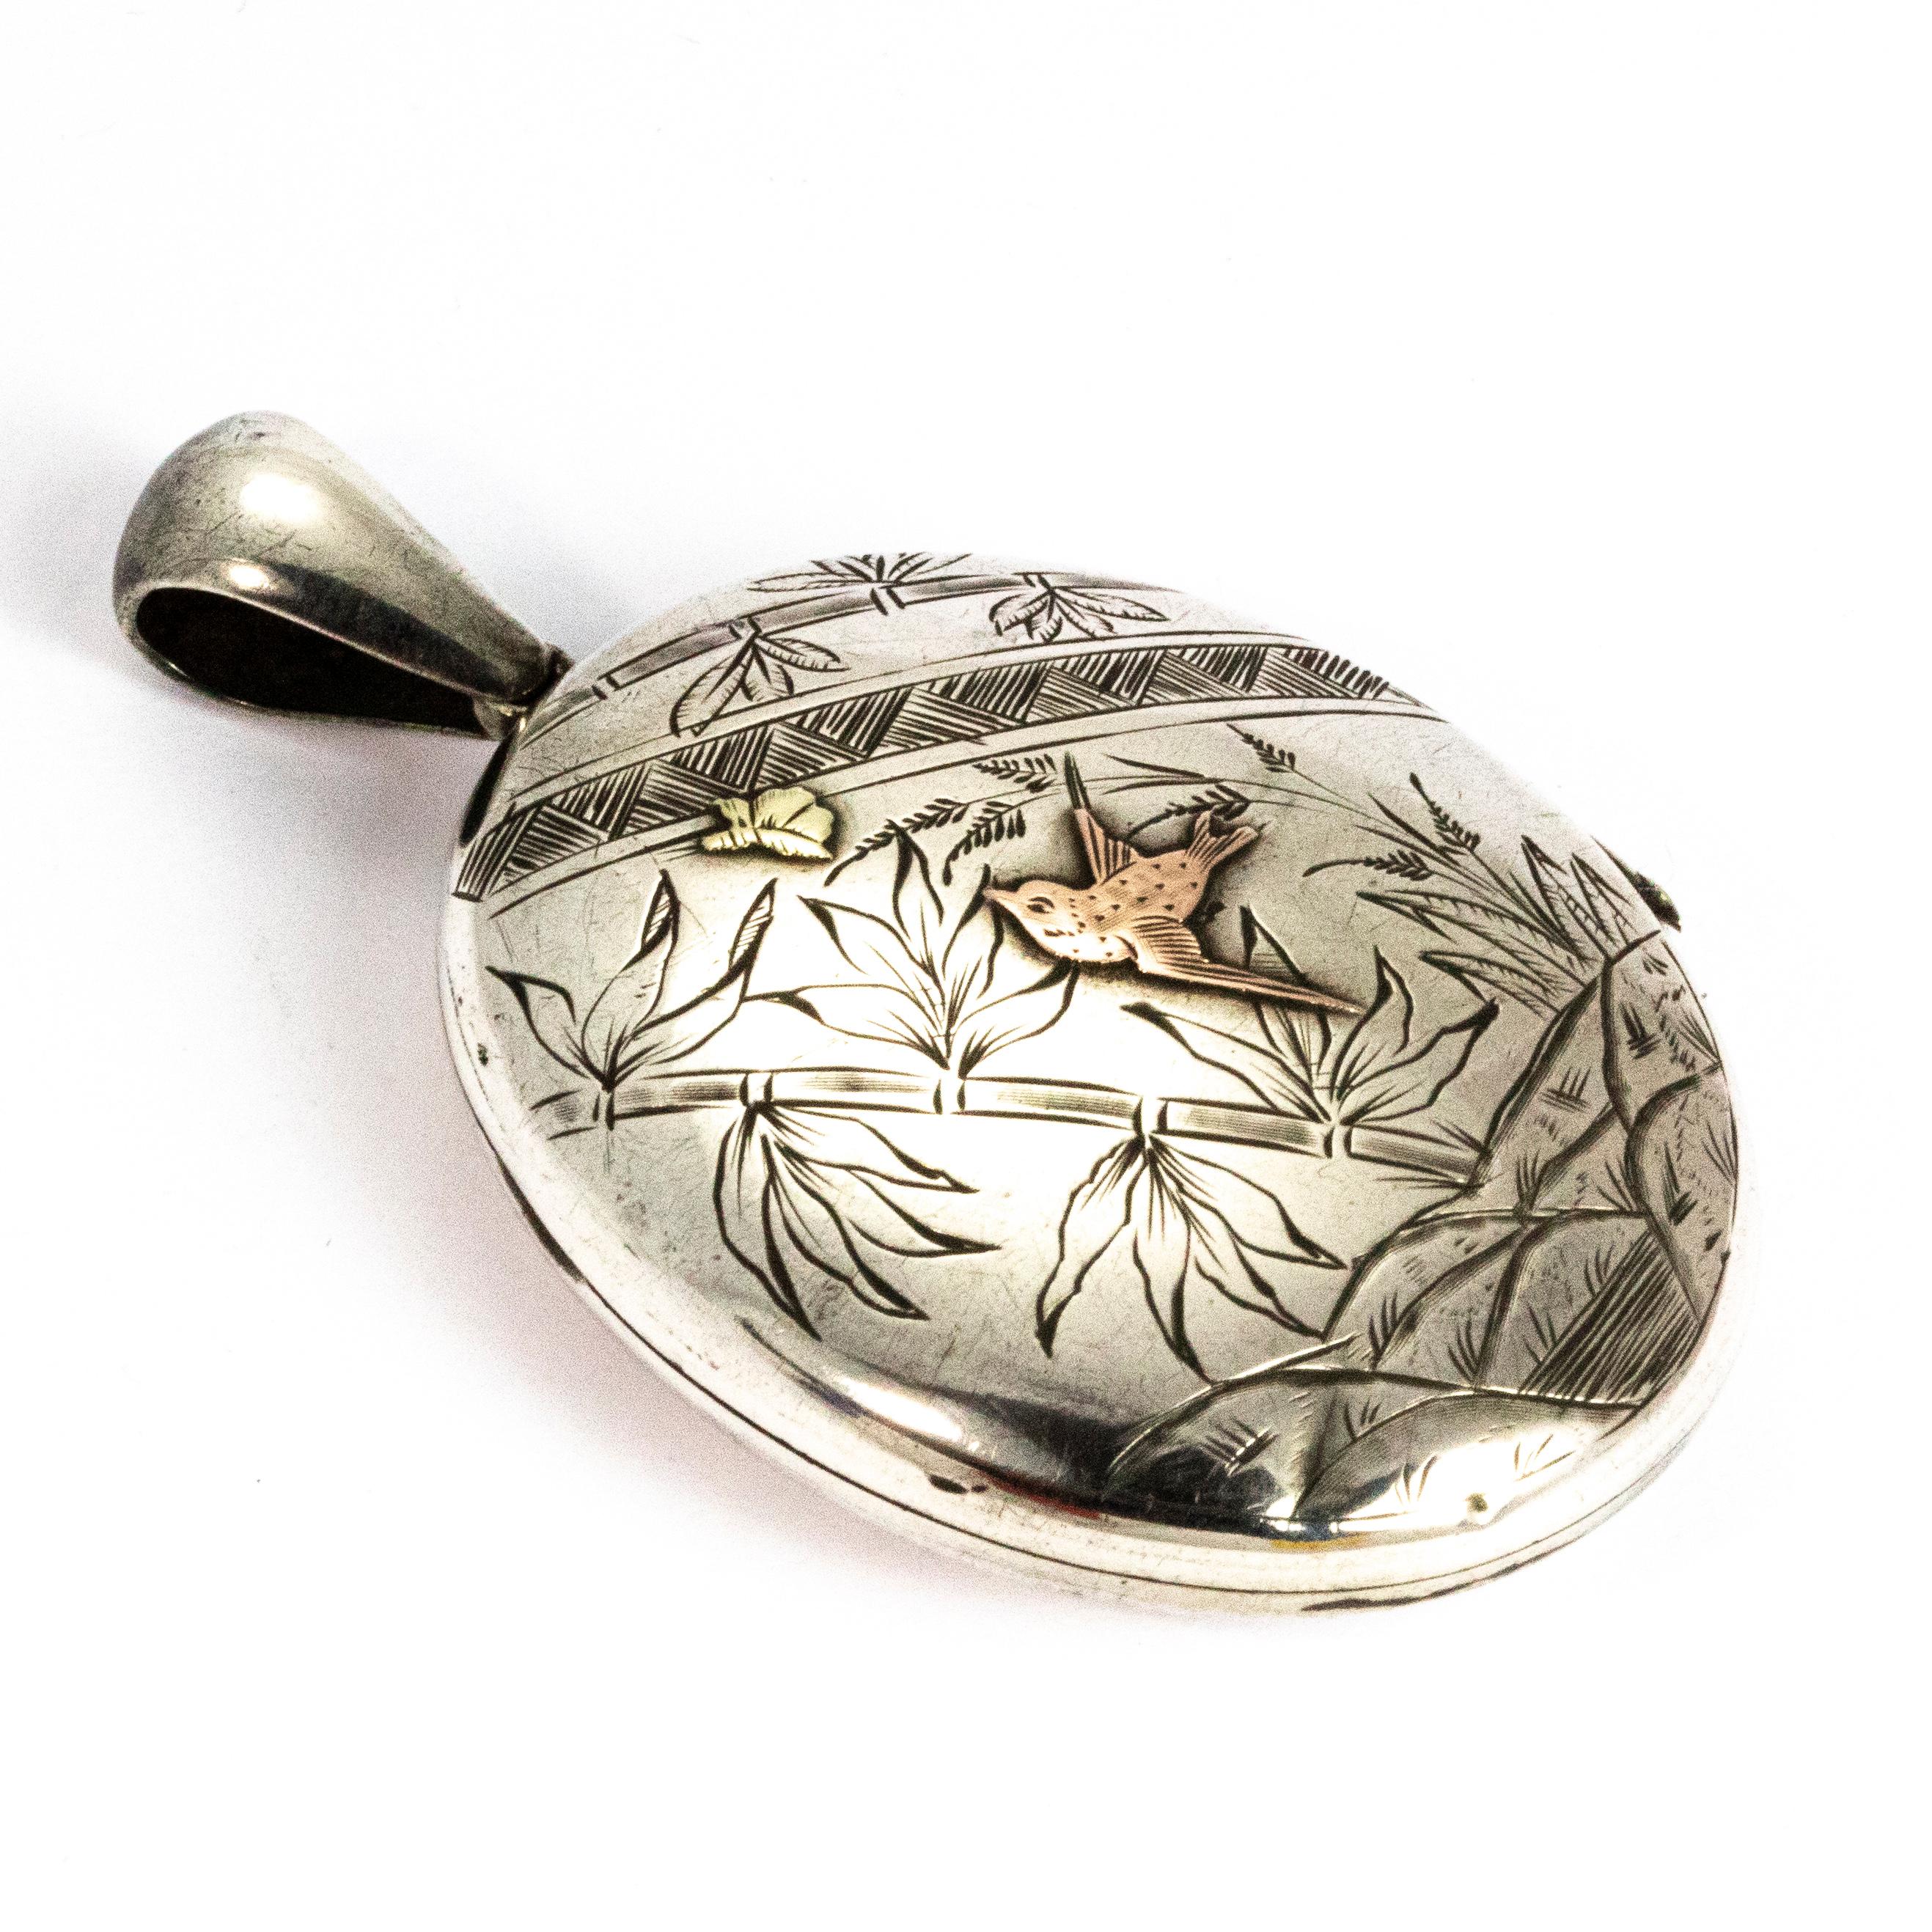 This wonderful late victorian locket is modelled out of silver but features a delicate rose gold bird and yellow gold butterfly. The silver locket itself is finely engraved with an out door scene that looks almost oriental themed with a bamboo style